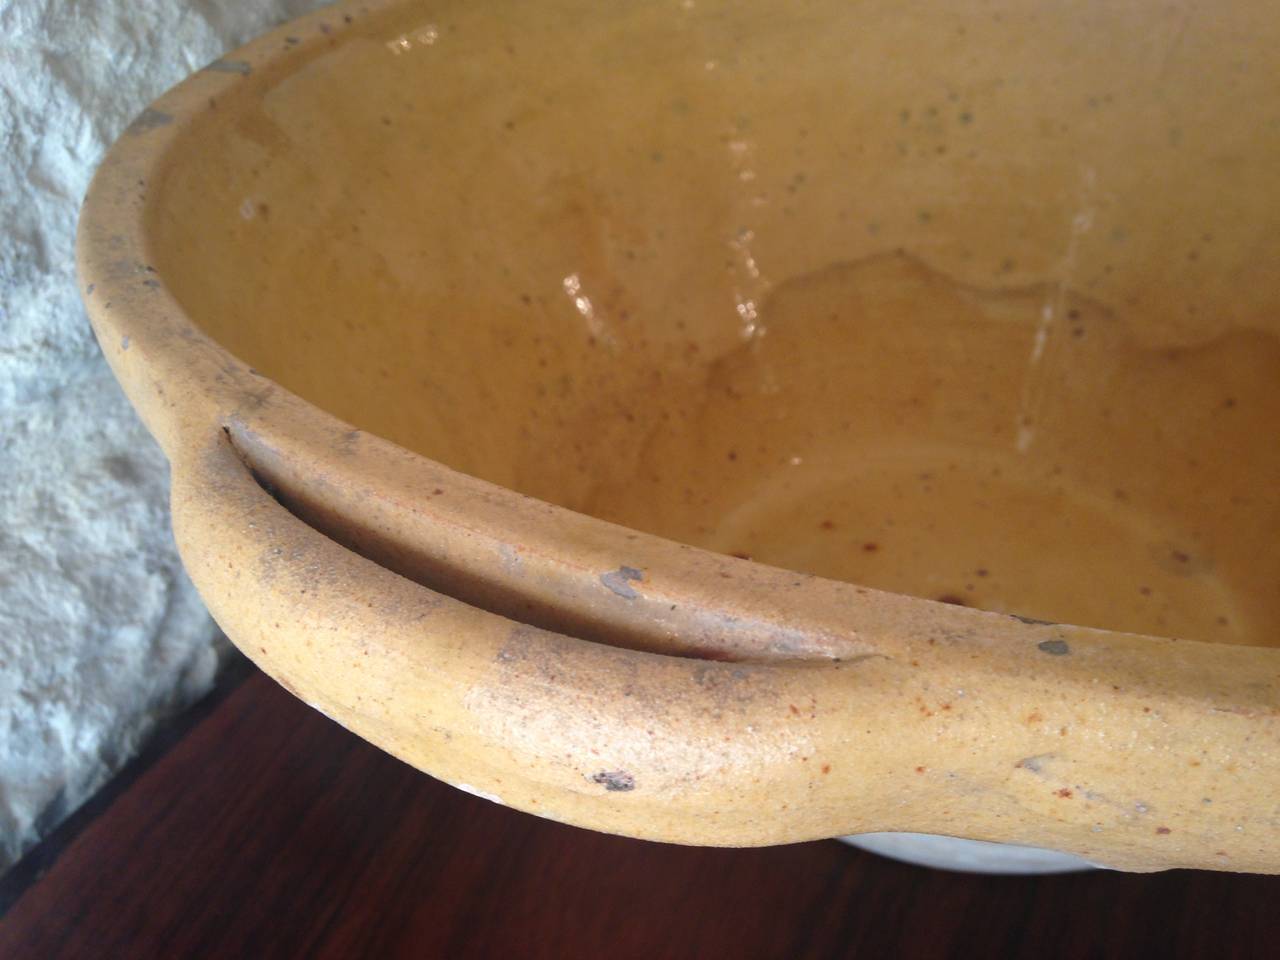 We found this wonderful handmade, glazed terracotta dairy bowl near Montauban in the Southwest of France, where its original use was to collect milk for the making of cheese. Beautiful overflowing with green apples or as an unusual container for a